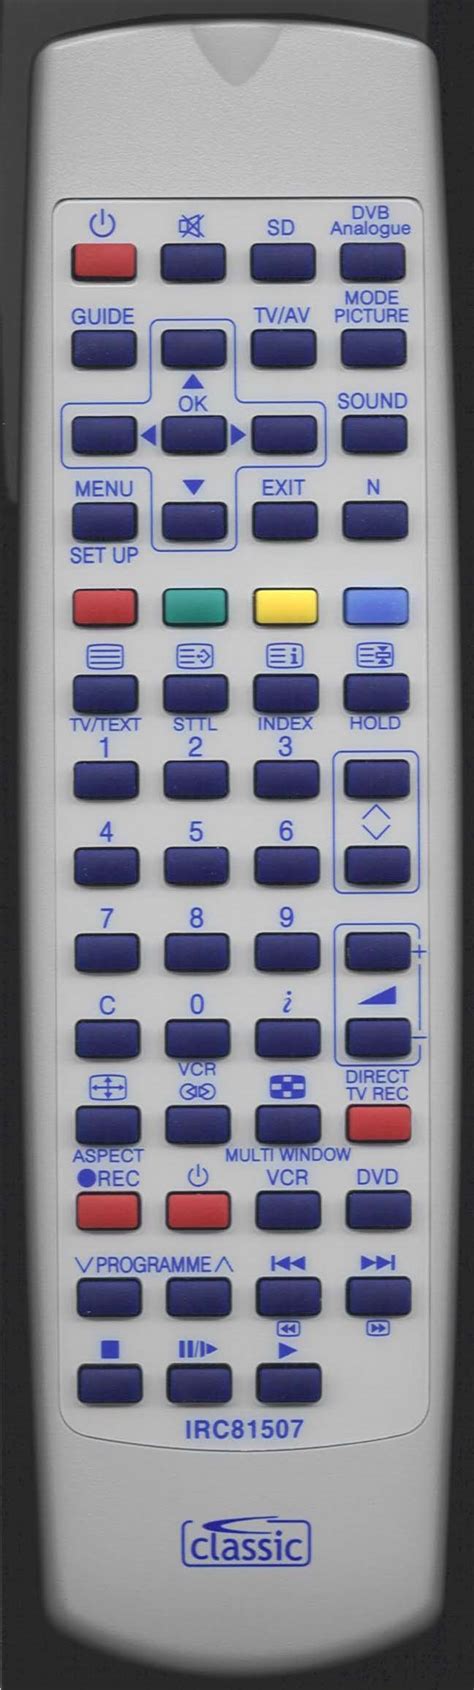 remote controls alternative replacements explained  classic